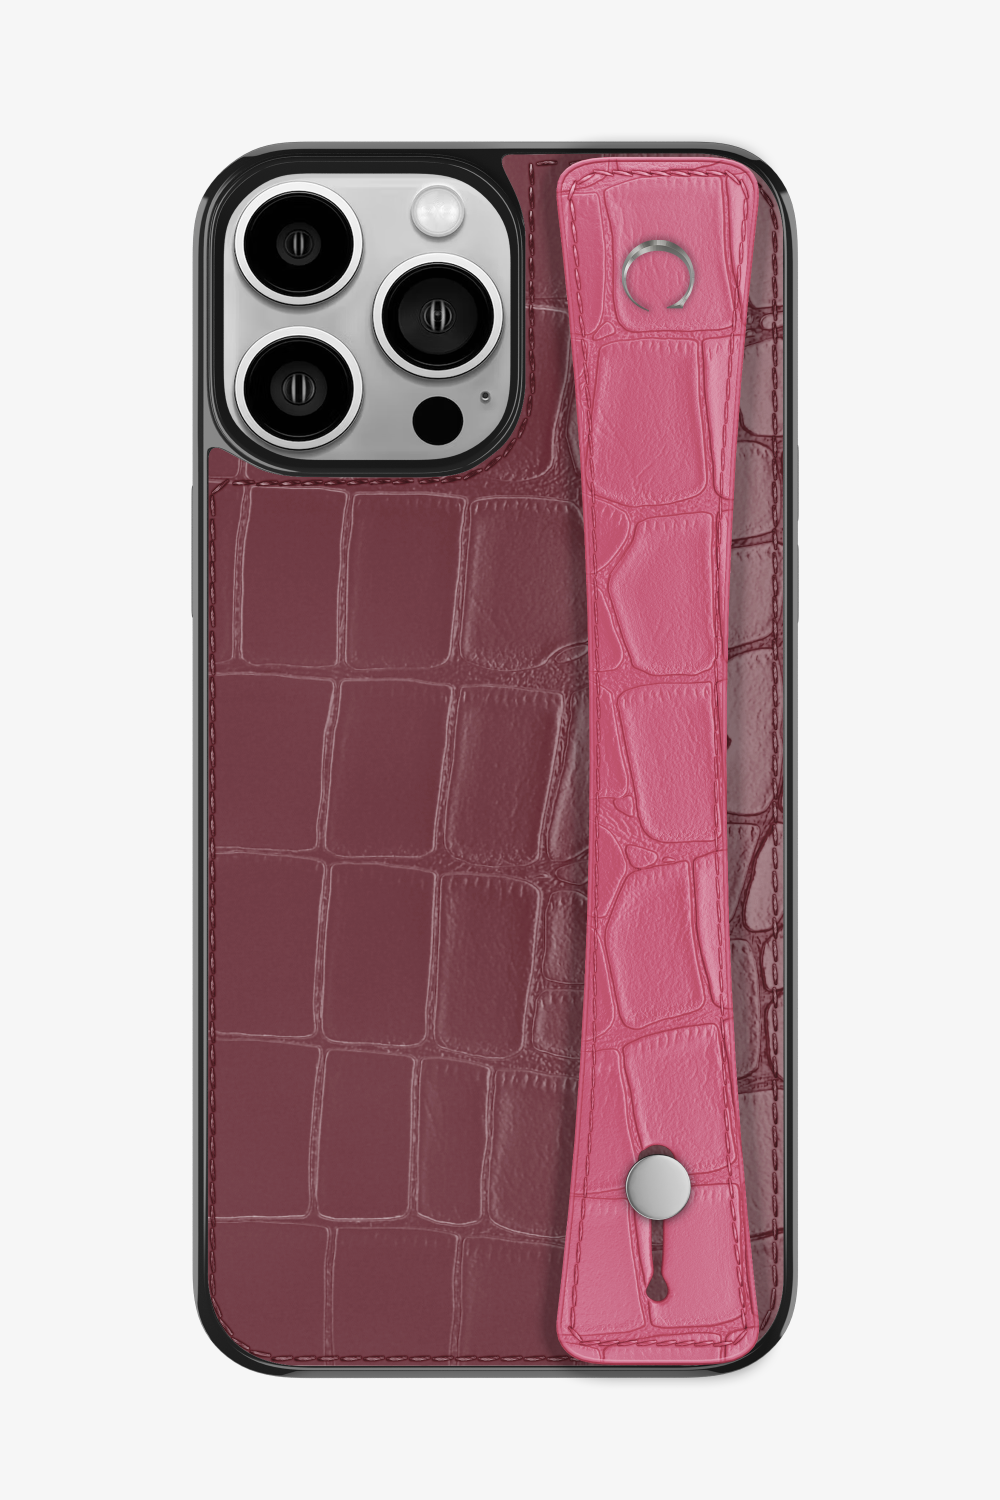 Alligator Sports Strap Case for iPhone 15 Pro Max - Burgundy / Pink - zollofrance